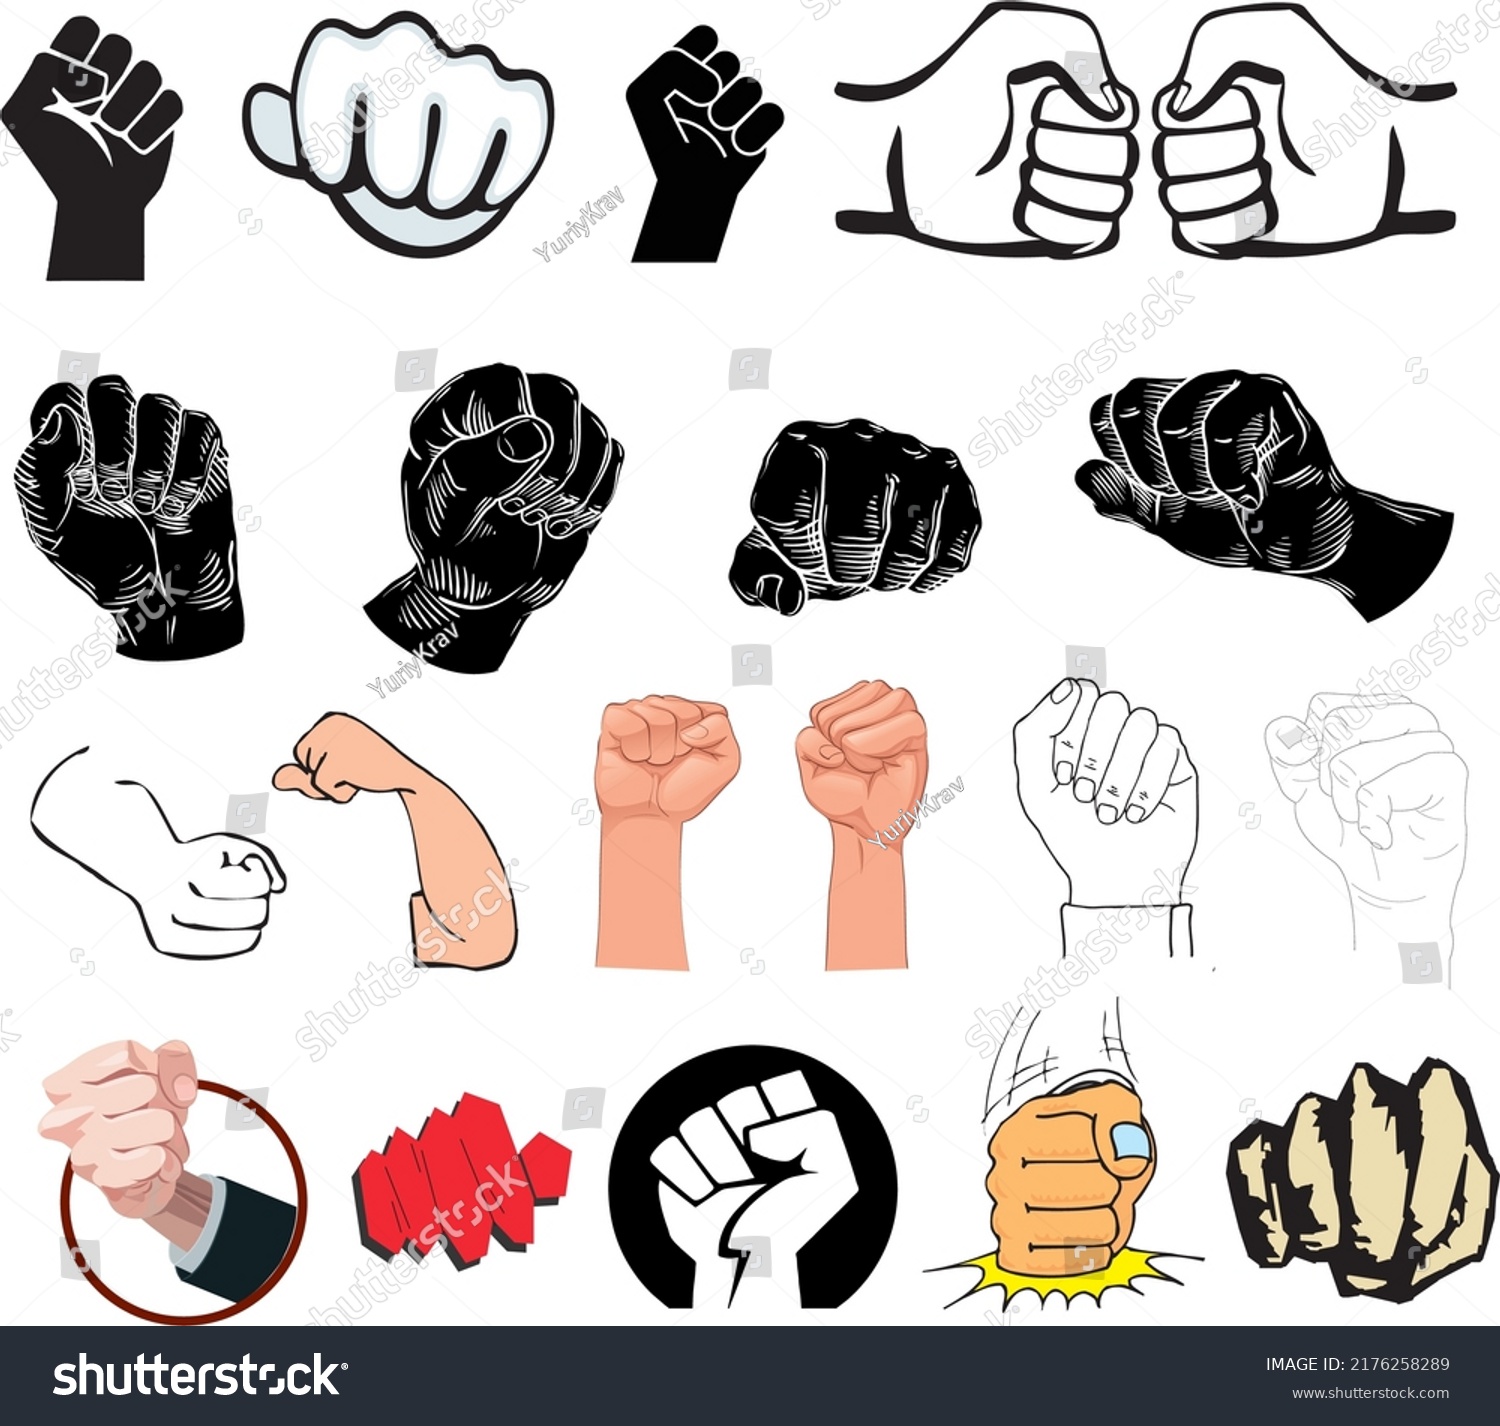 Fist Compilation Collection Vector Stock Vector Royalty Free 2176258289 Shutterstock 